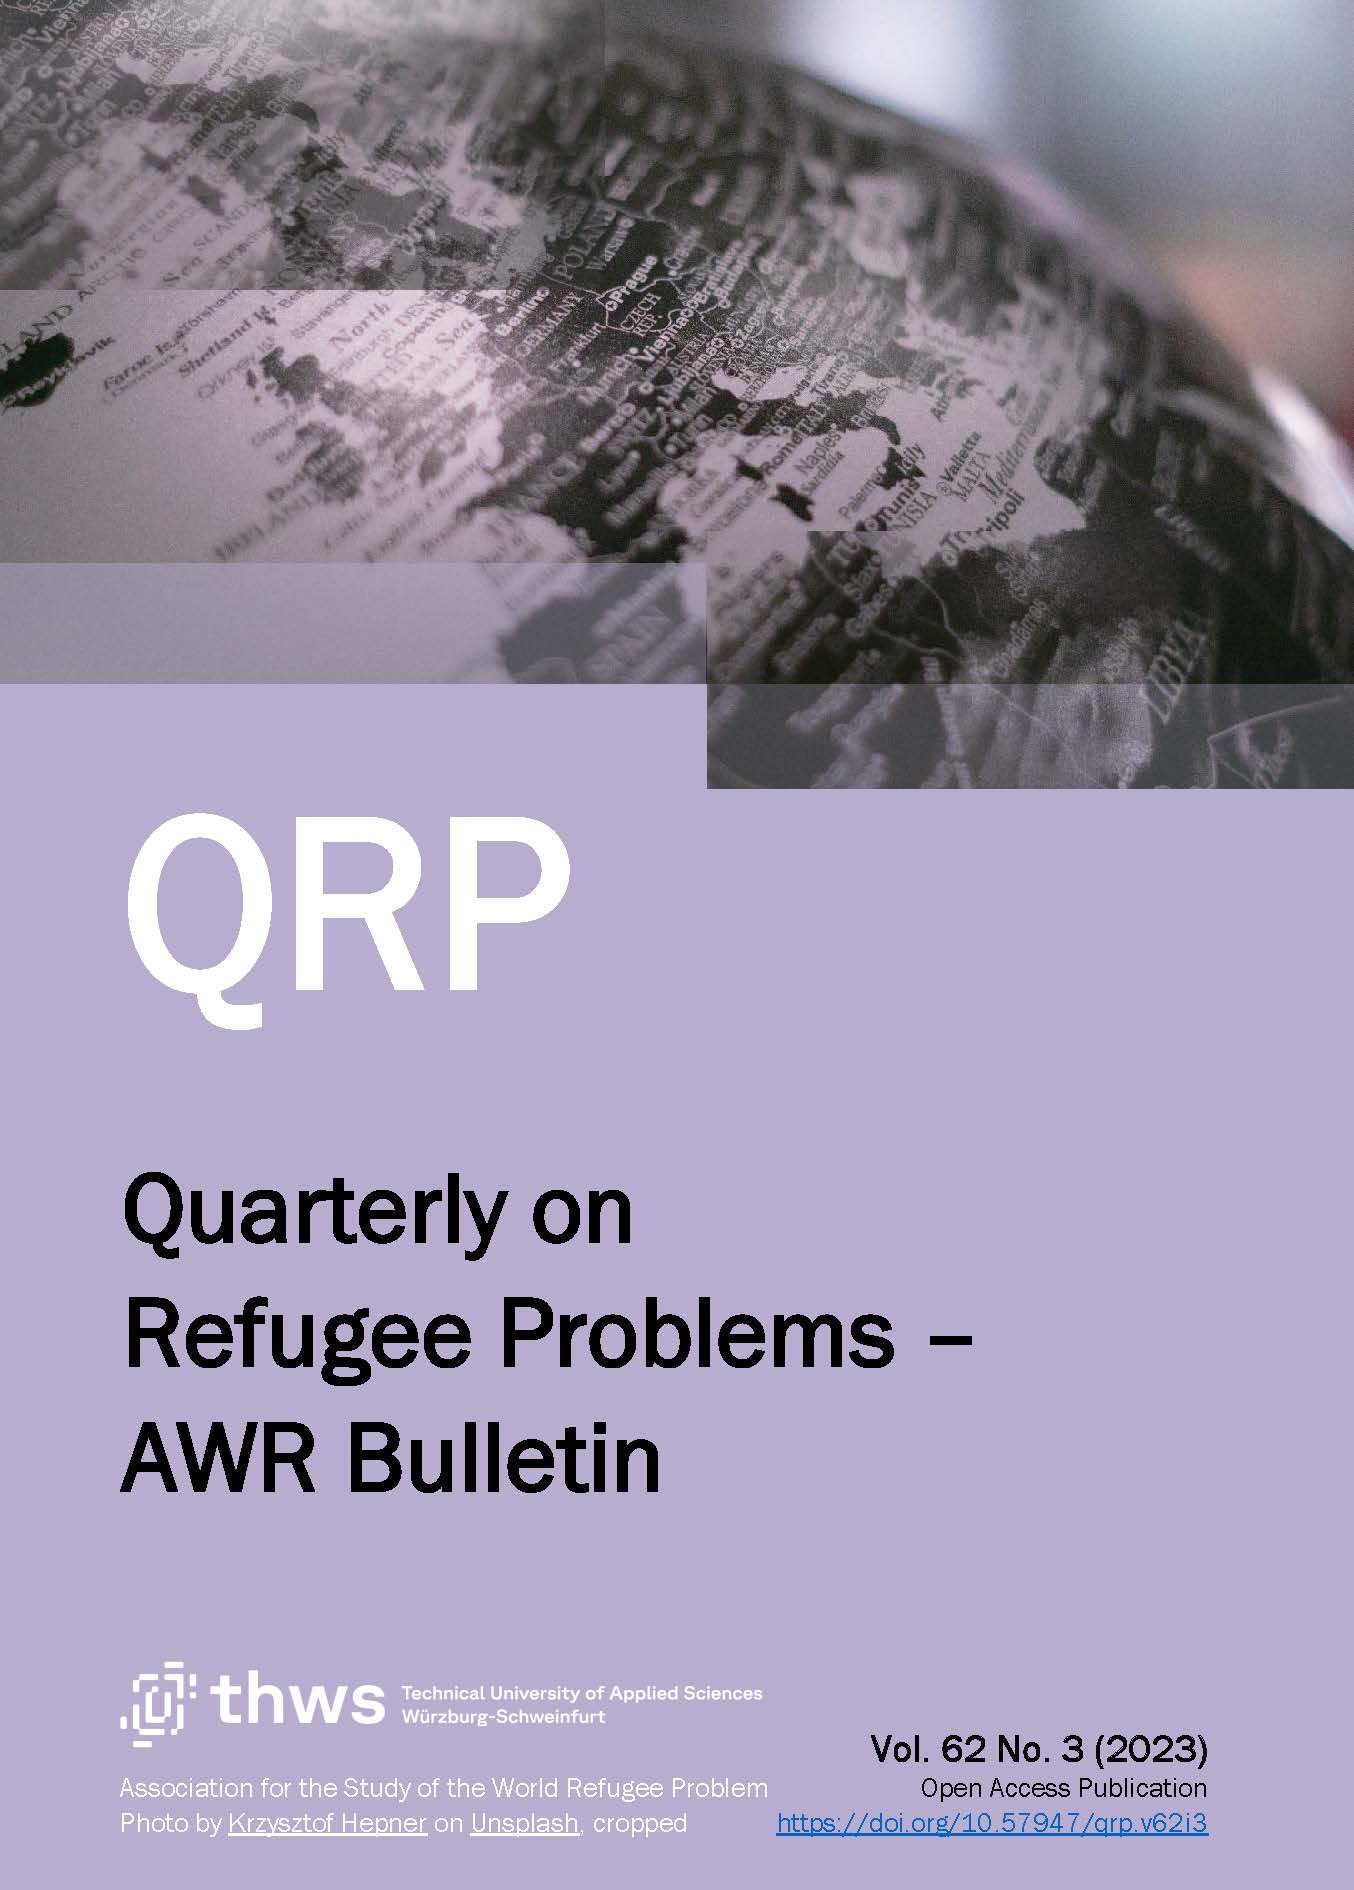 The cover of the 2023, volume 62, third issue of the Quarterly on Refugee Problems - AWR Bulletin